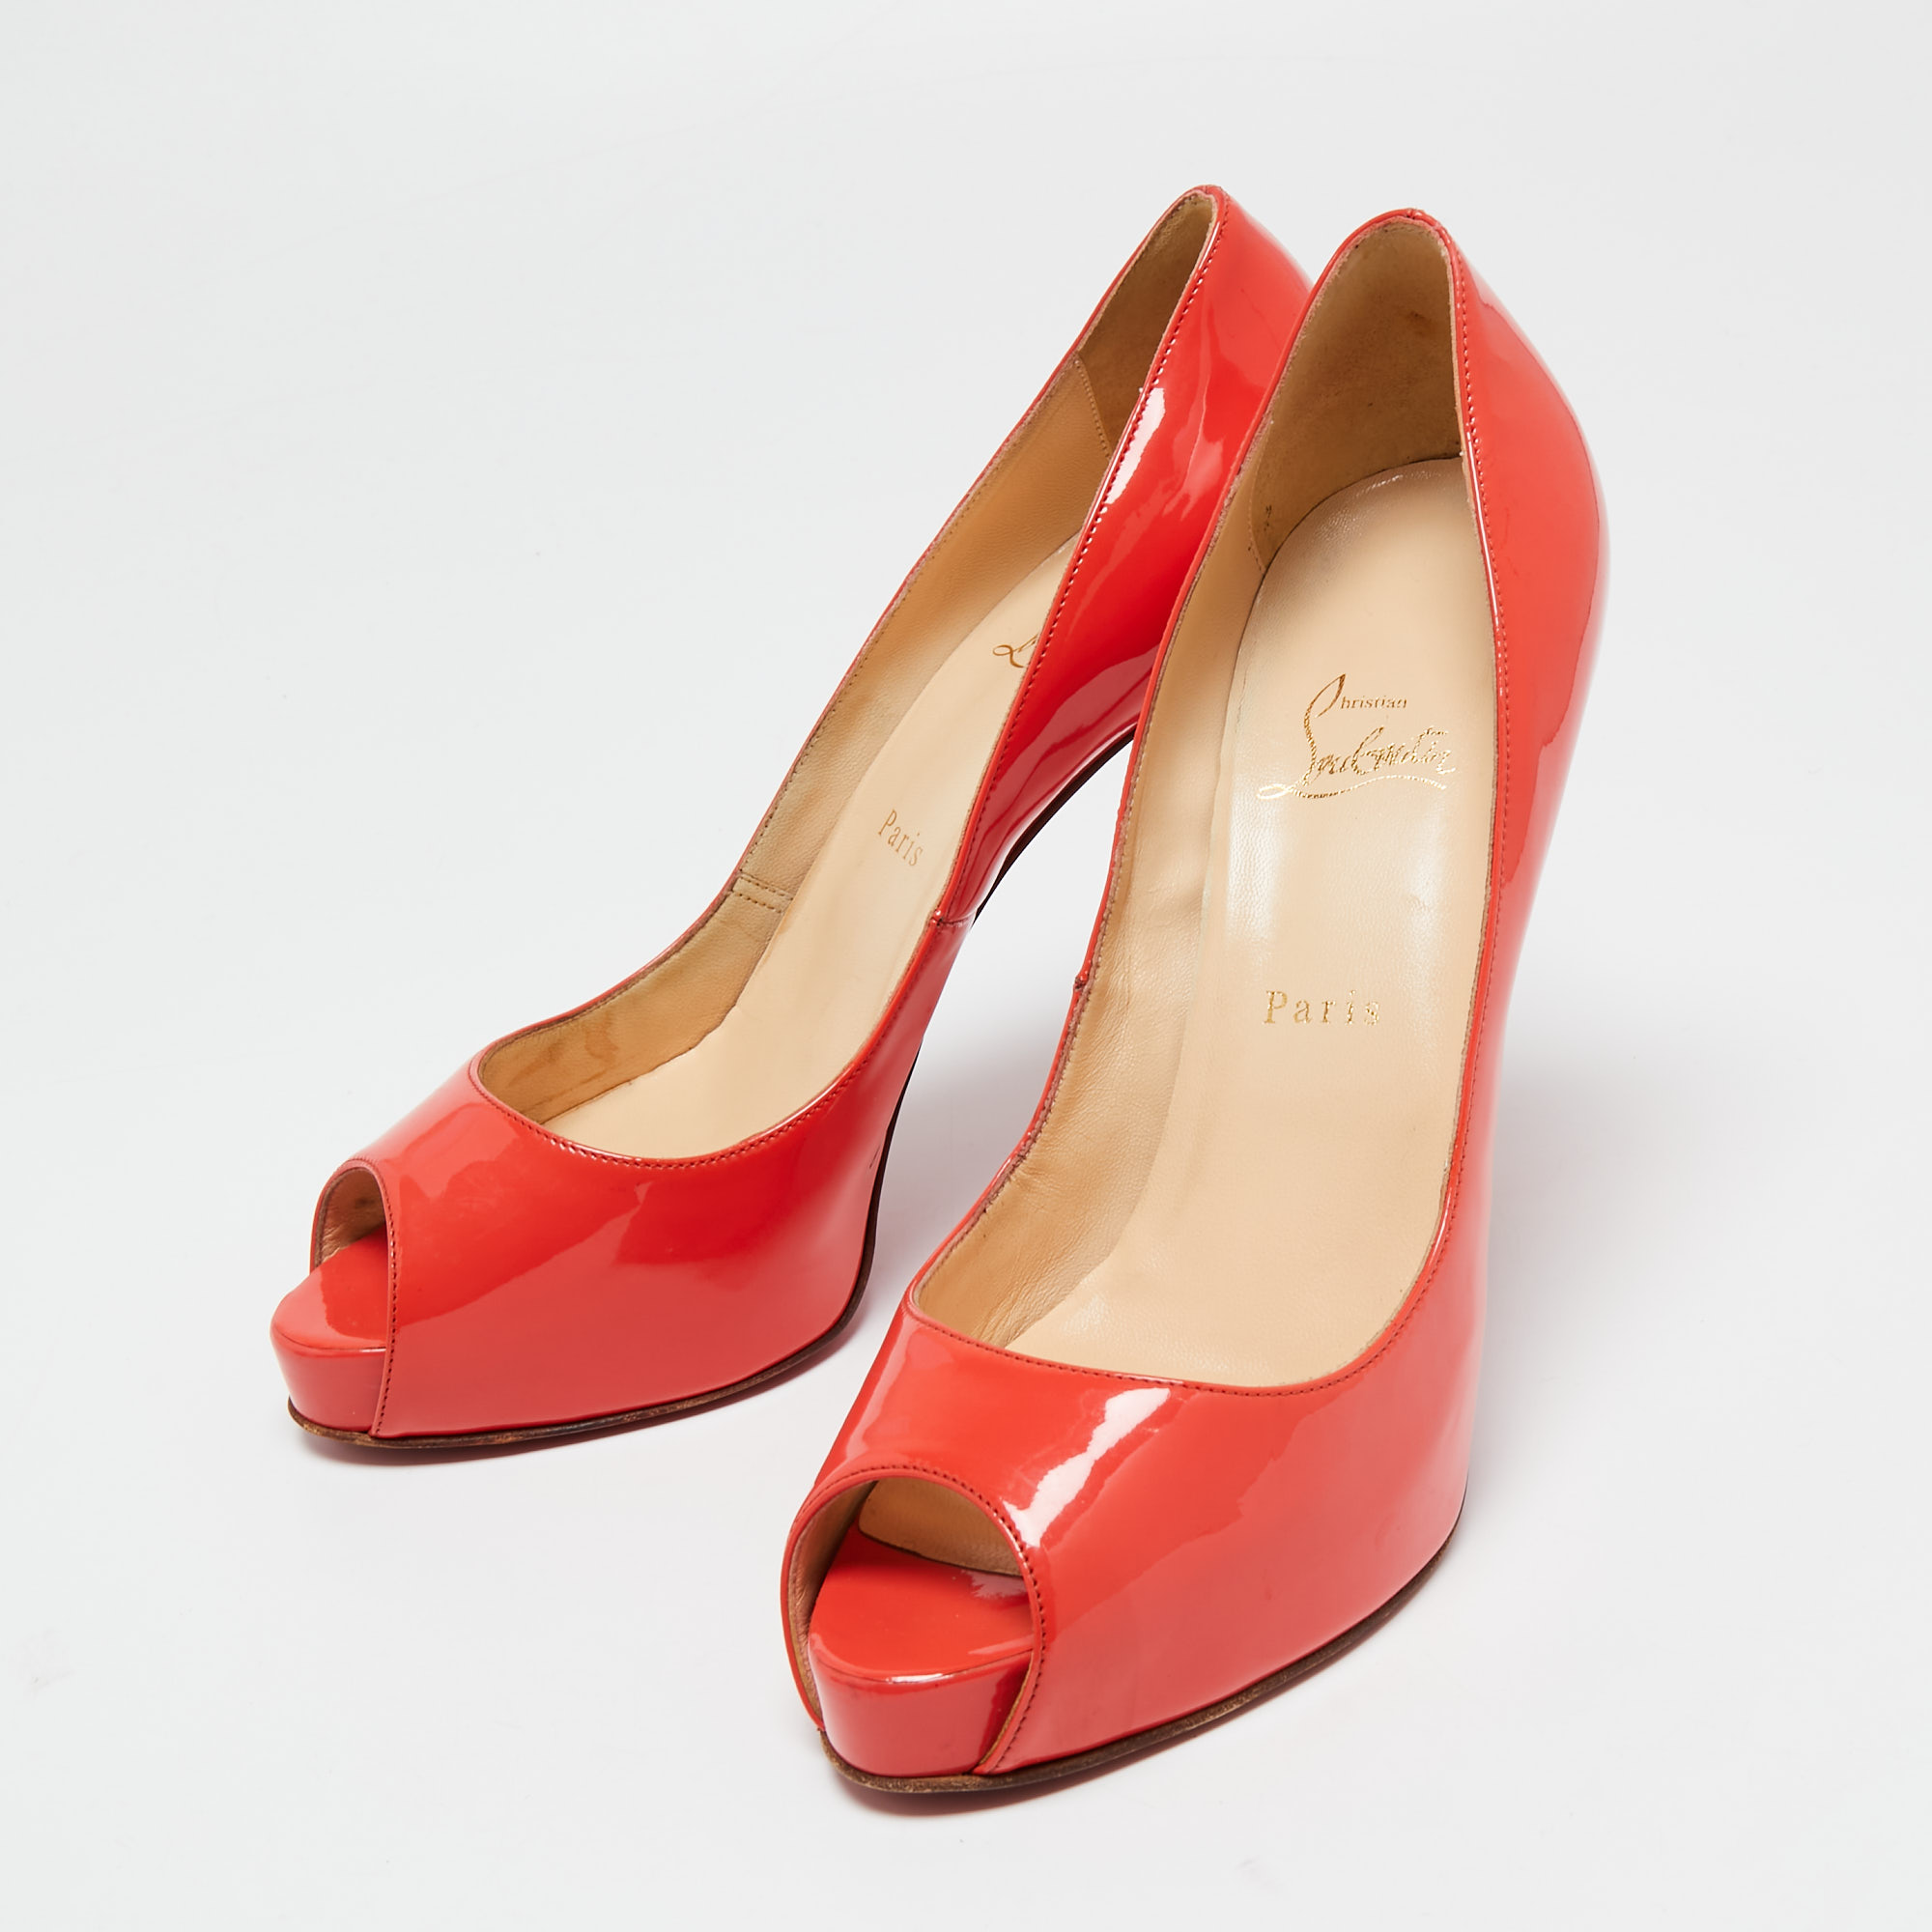 

Christian Louboutin Coral Red Patent Leather Very Prive Peep-Toe Pumps Size